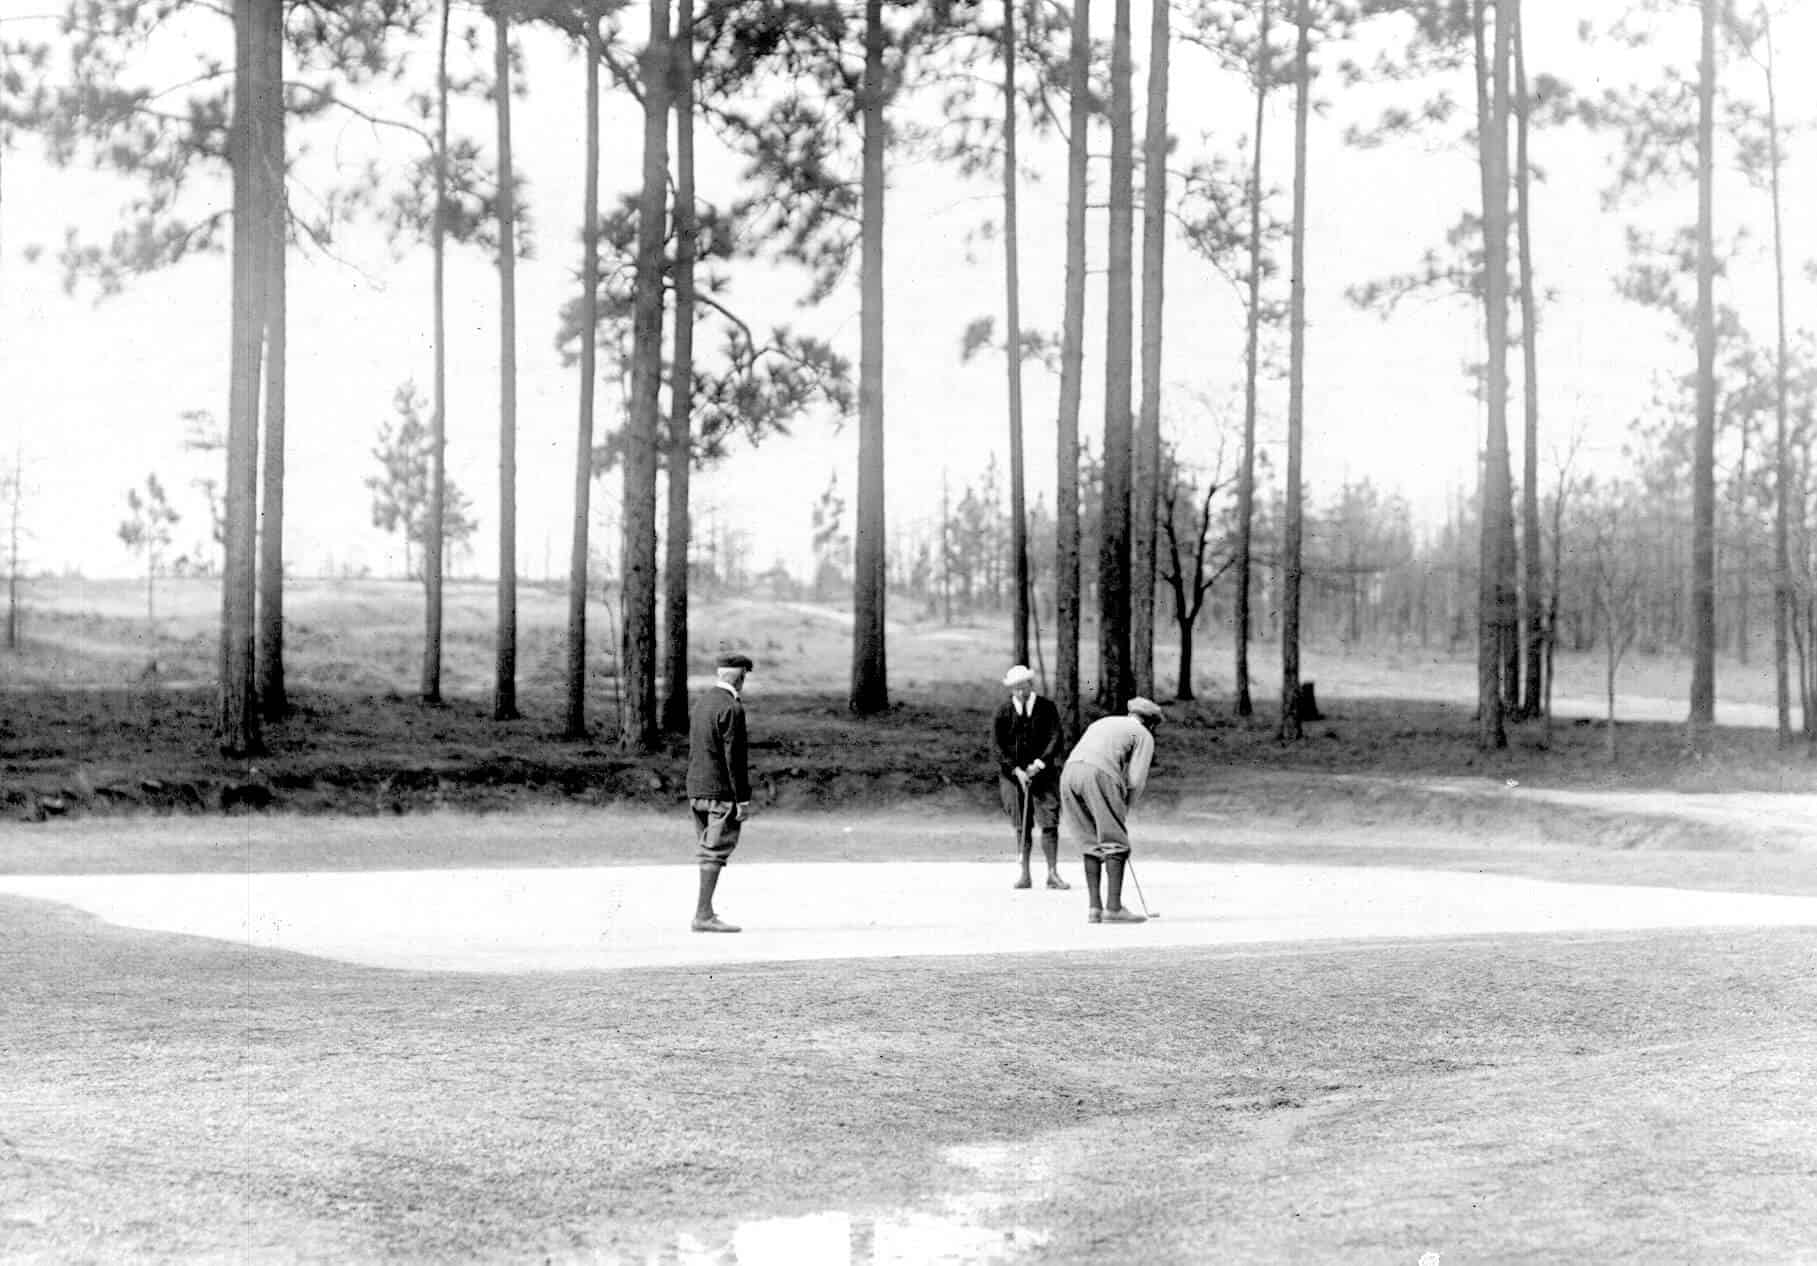 Donald Ross would soon rededicate himself to Pinehurst No. 2